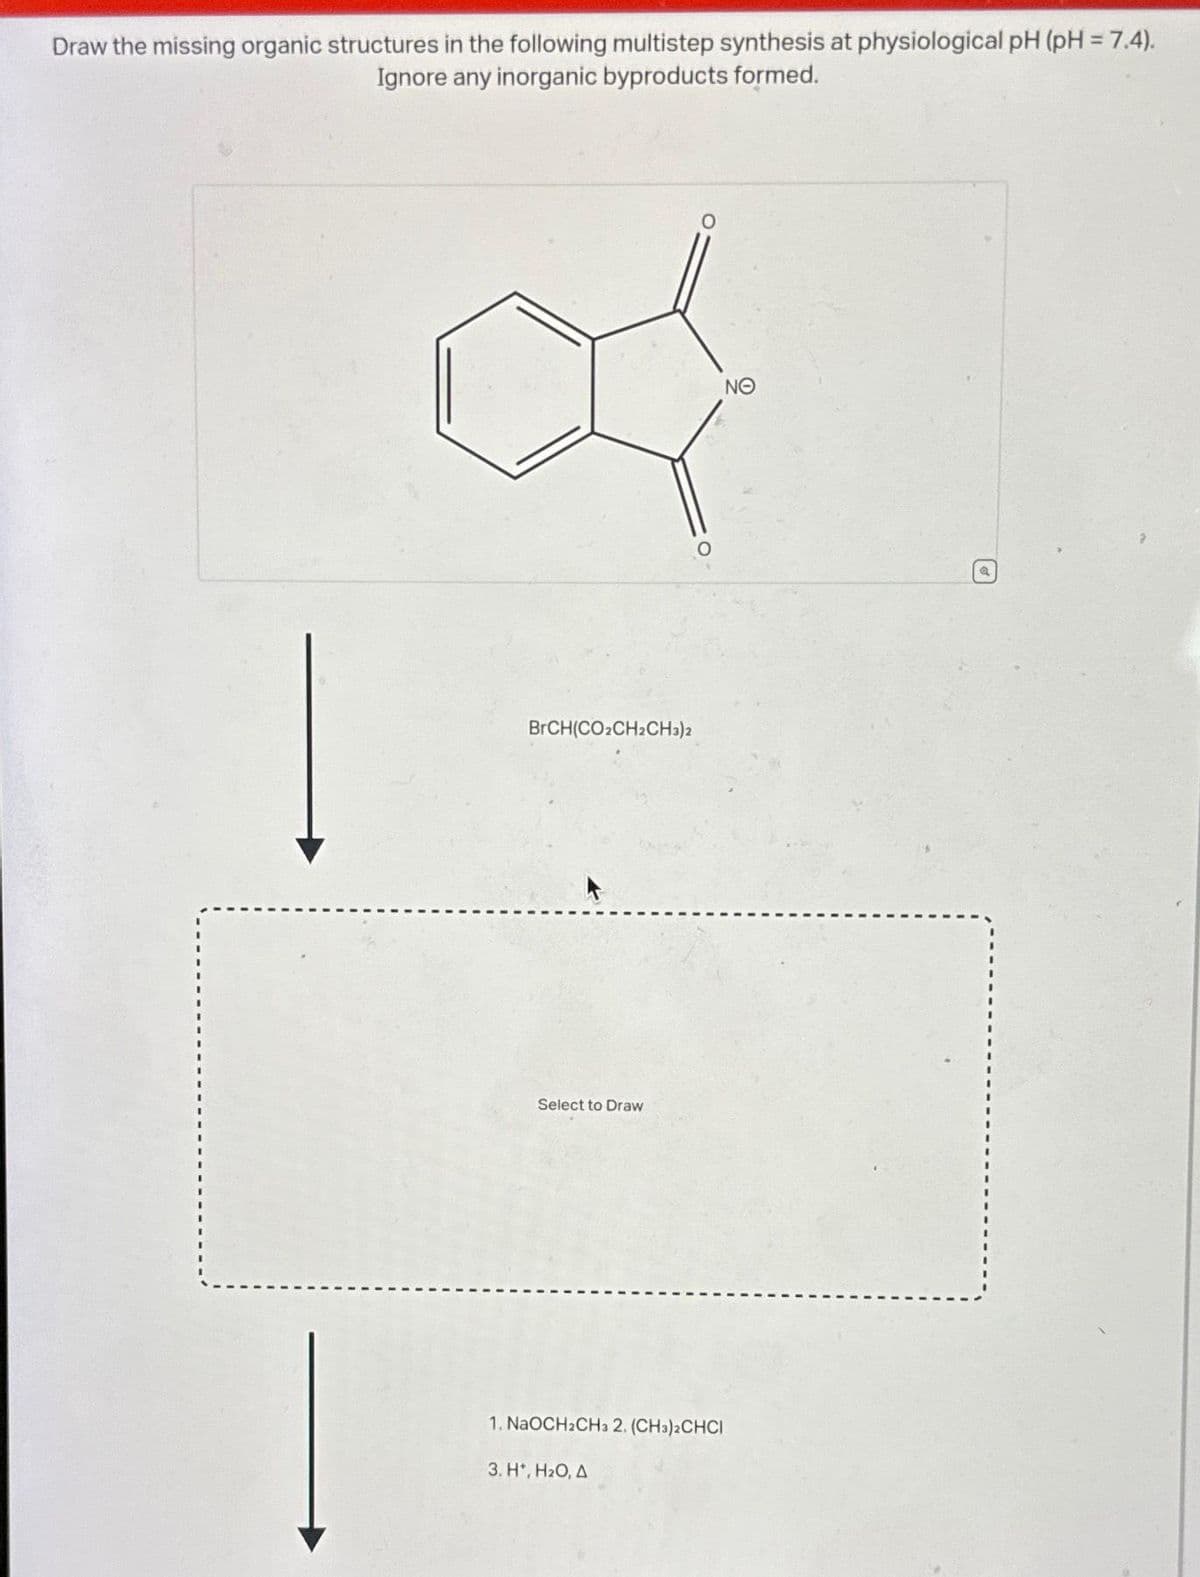 Draw the missing organic structures in the following multistep synthesis at physiological pH (pH = 7.4).
Ignore any inorganic byproducts formed.
BrCH(CO2CH2CH3)2
Select to Draw
O
1. NaOCH2CH3 2. (CH3)2CHCI
3. H*, H₂O, A
ΝΘ
Q